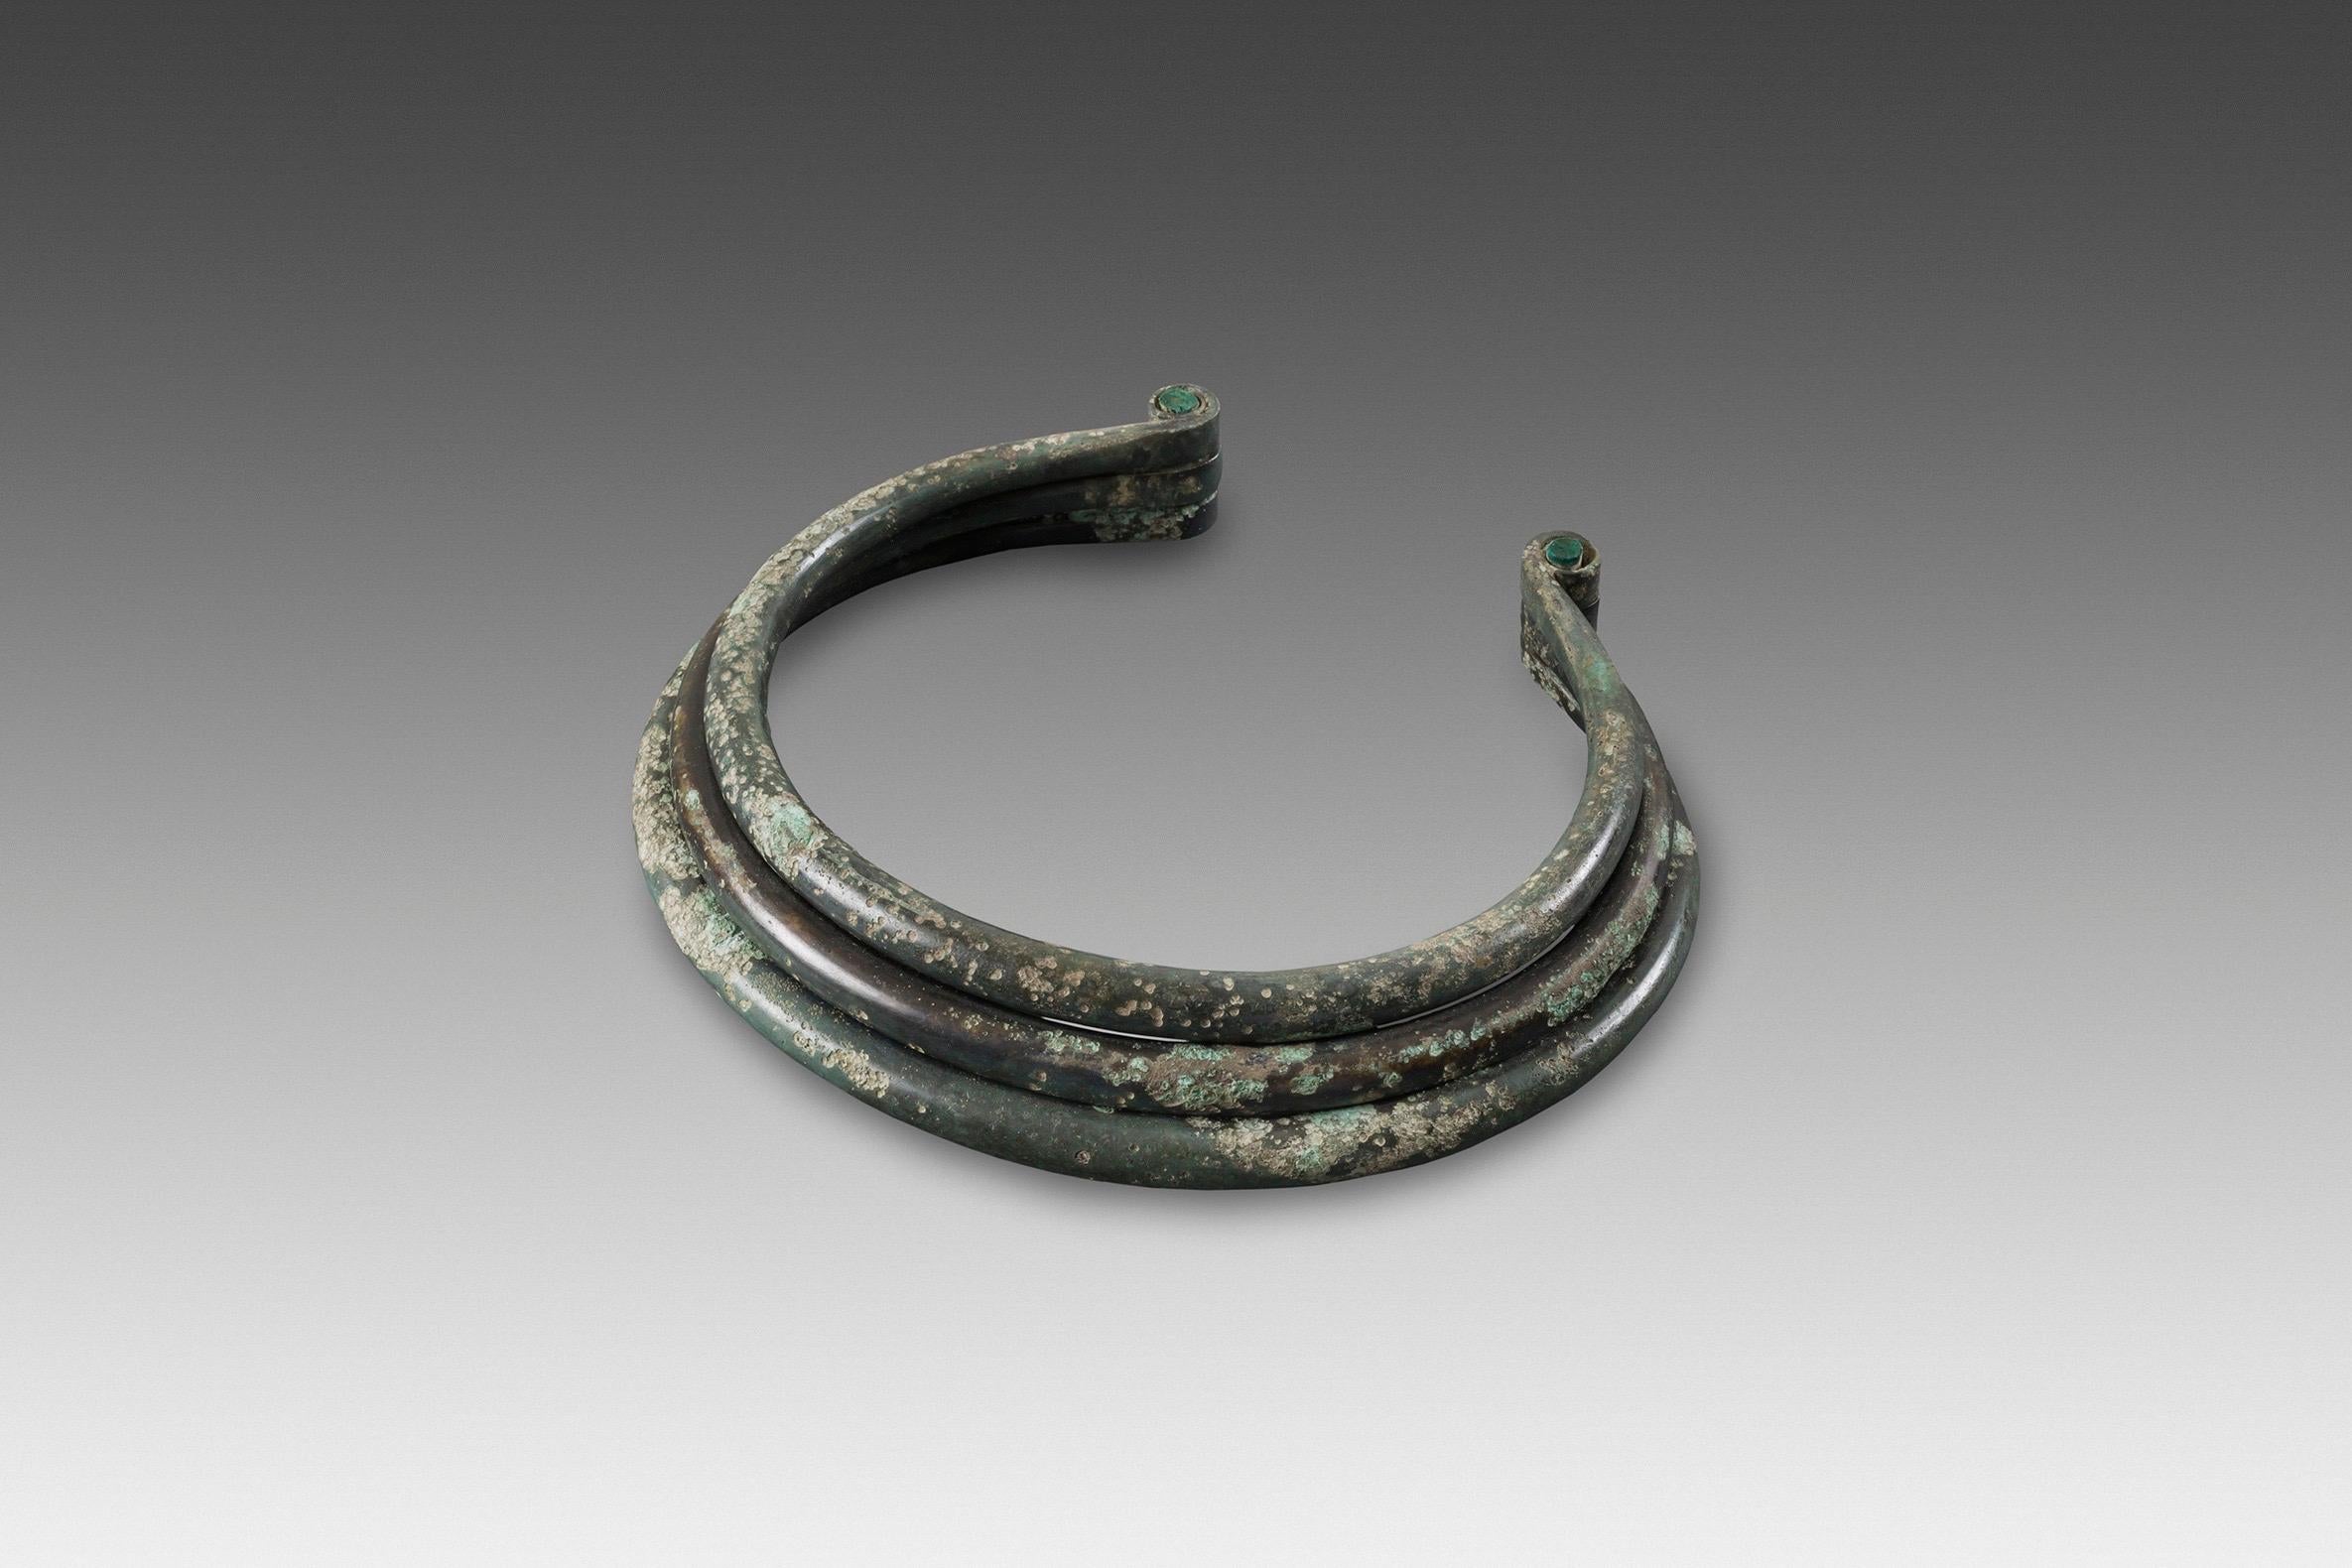 Torque composed of three rings
European art, circa 2000-1500 BC
Bronze
D max ext: 16.3 cm

 This impressive torque, very elegant and fine despite its extraordinary size and weight, consists of three large bronze rods with circular section,